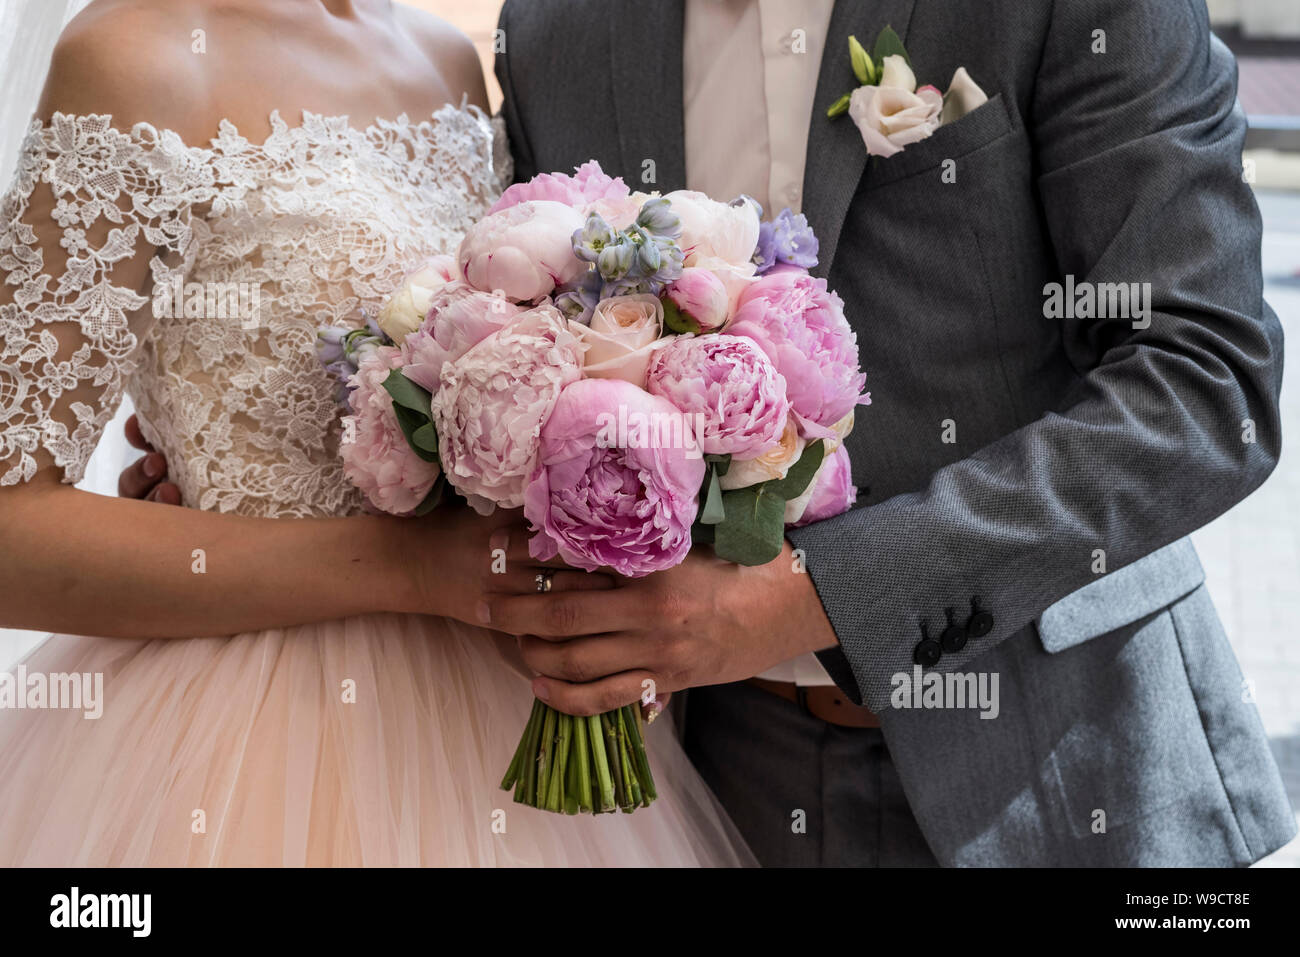 Wedding. Wedding bouquet of pink and lilac peonies in bride's and groom's hands Stock Photo